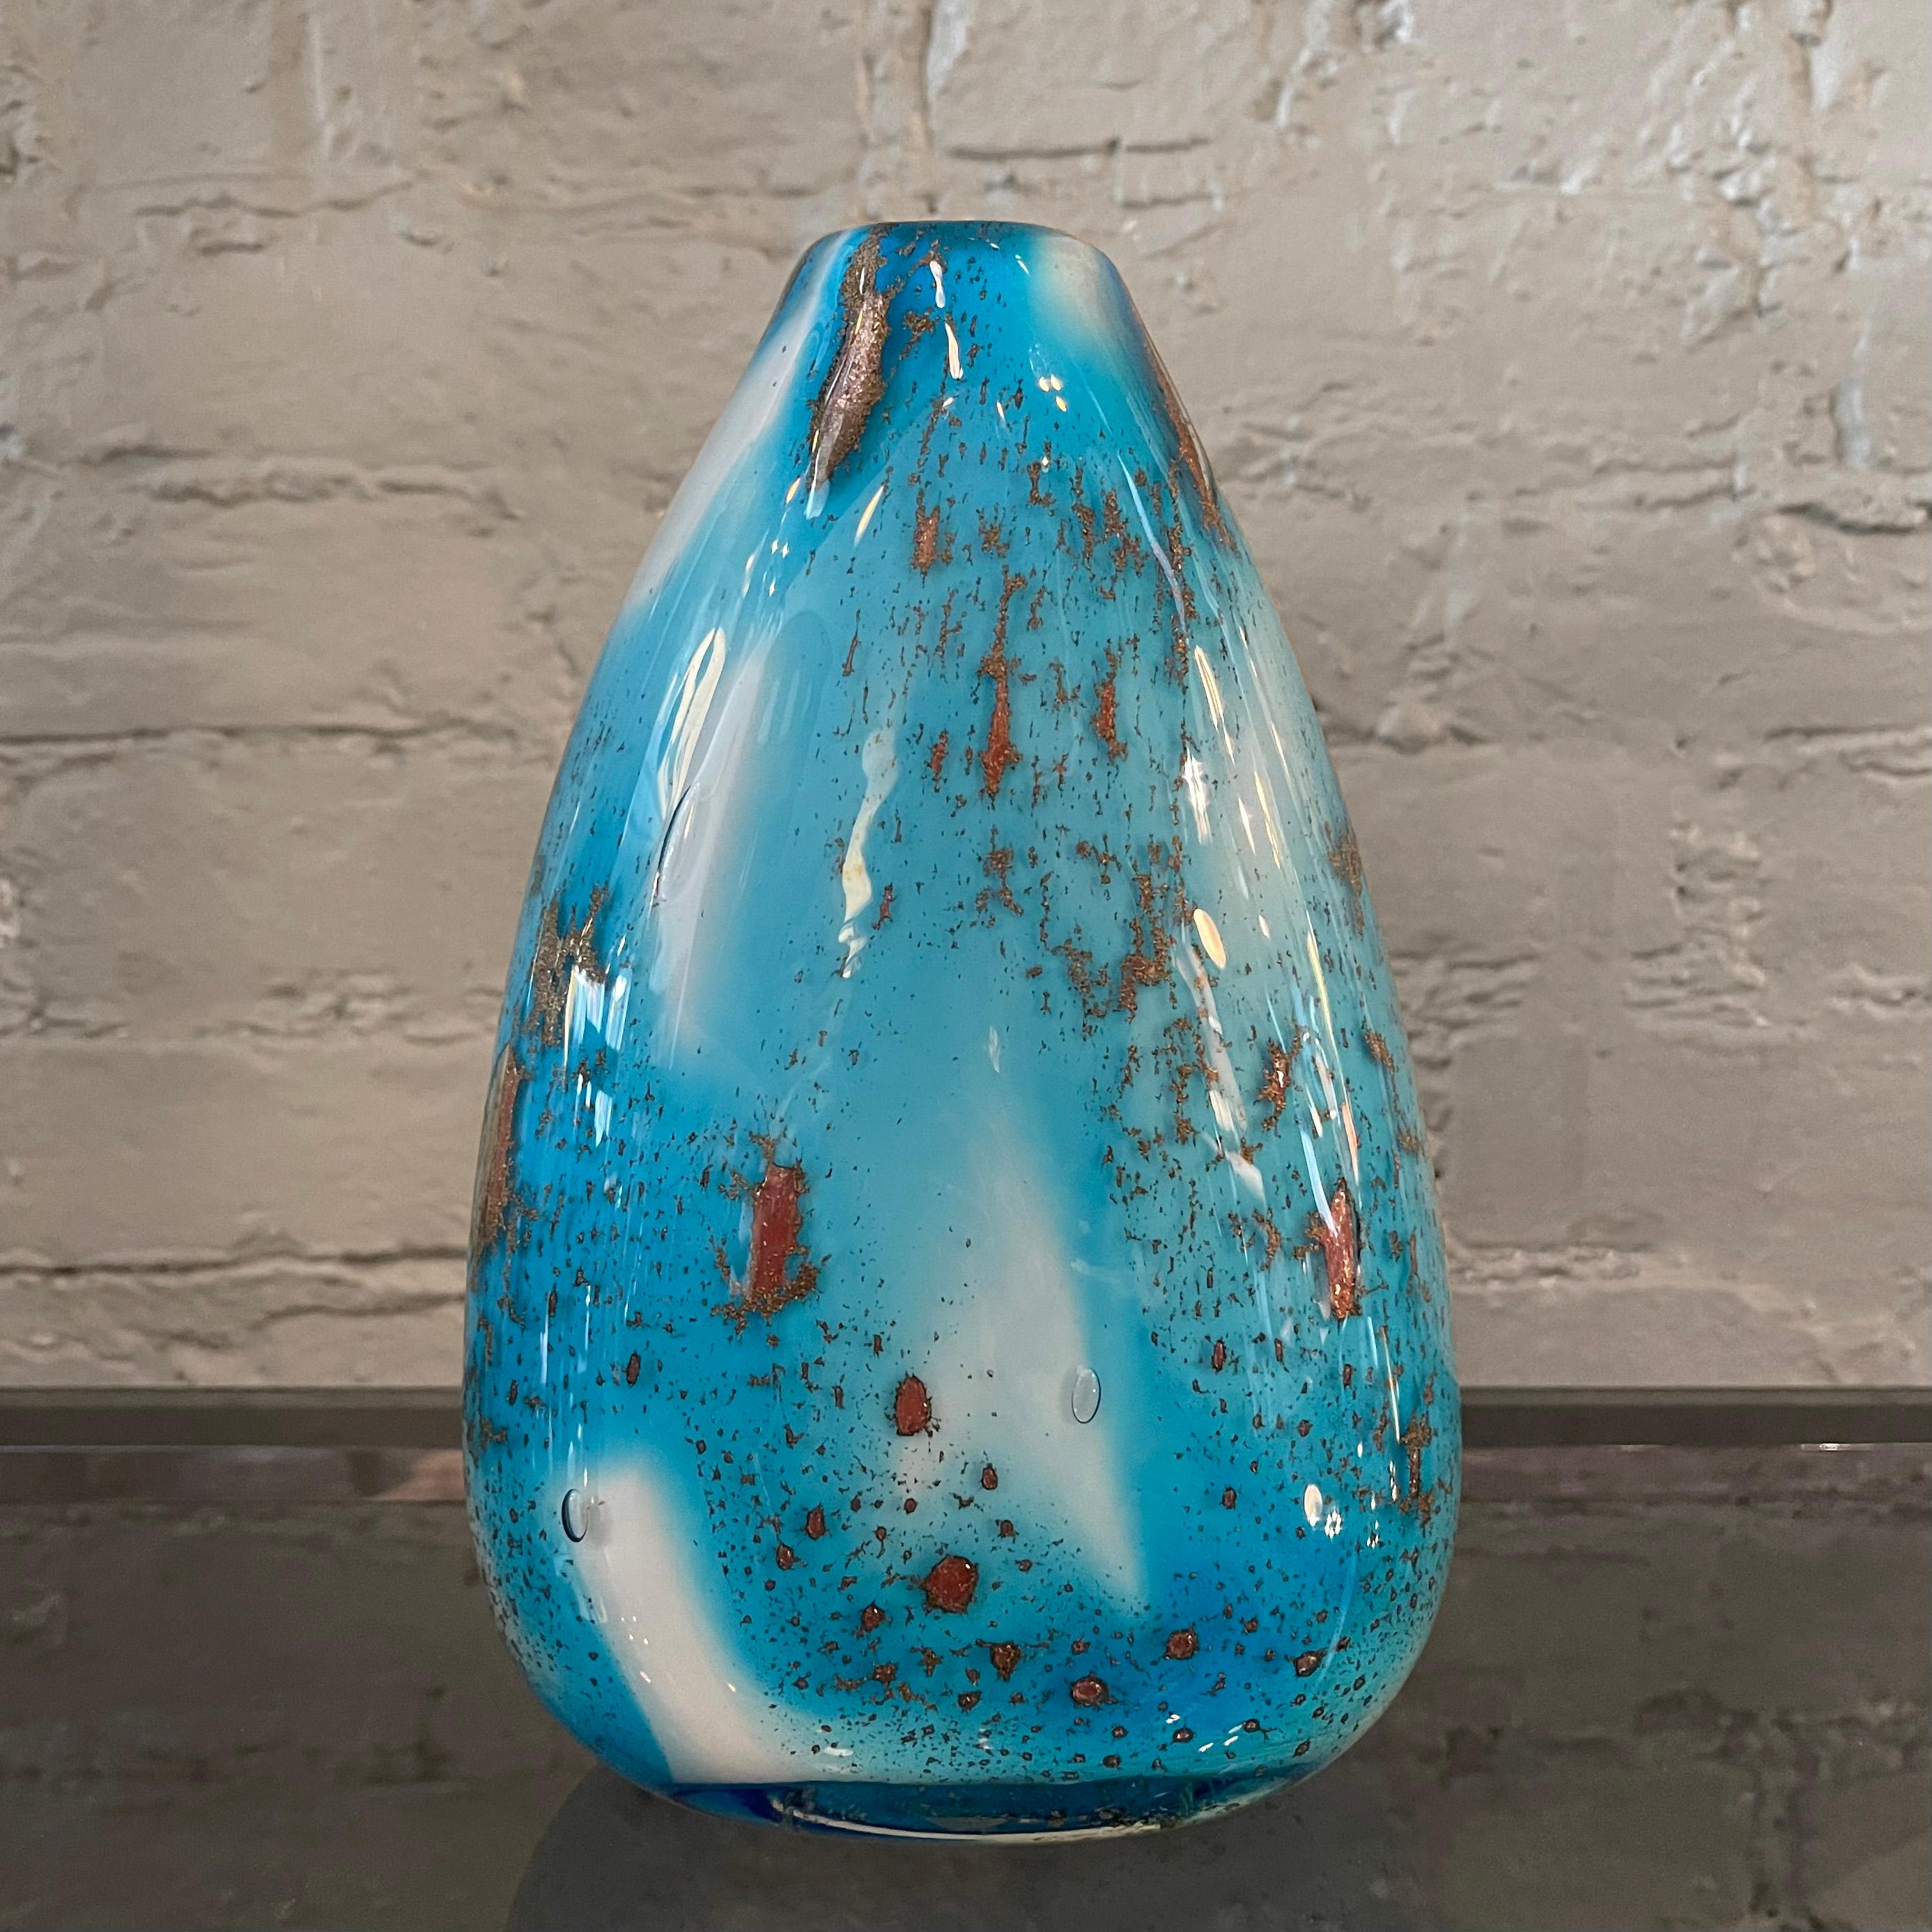 Mid century modern, pear shaped, Murano art glass vase in gradient sky blue and white with gold flecks throughout.